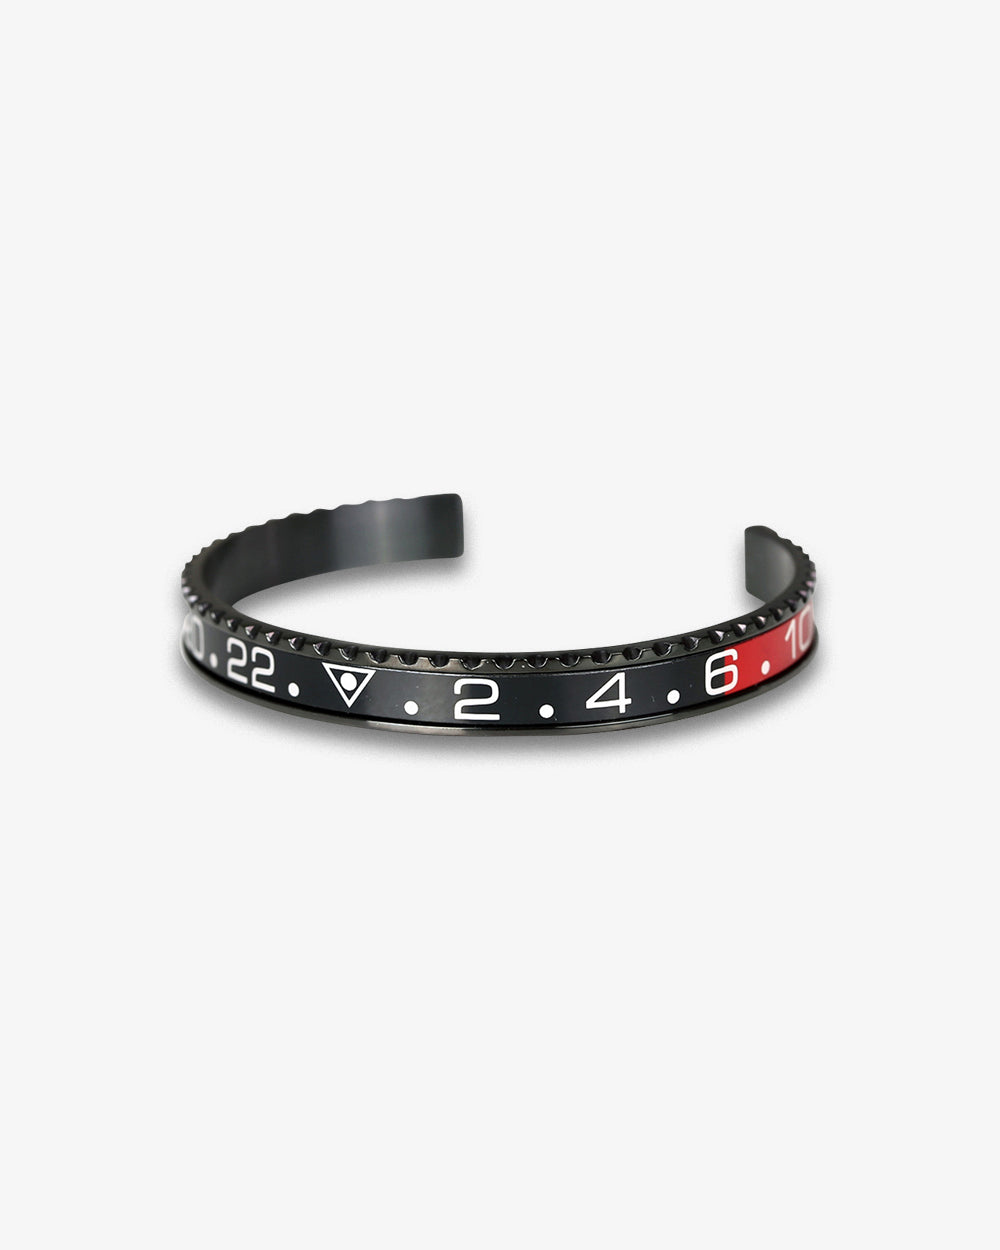 Swiss Concept Classic Dual Time GMT II 'Coke' Speed Bracelet (Black Gold) = Stainless Steel